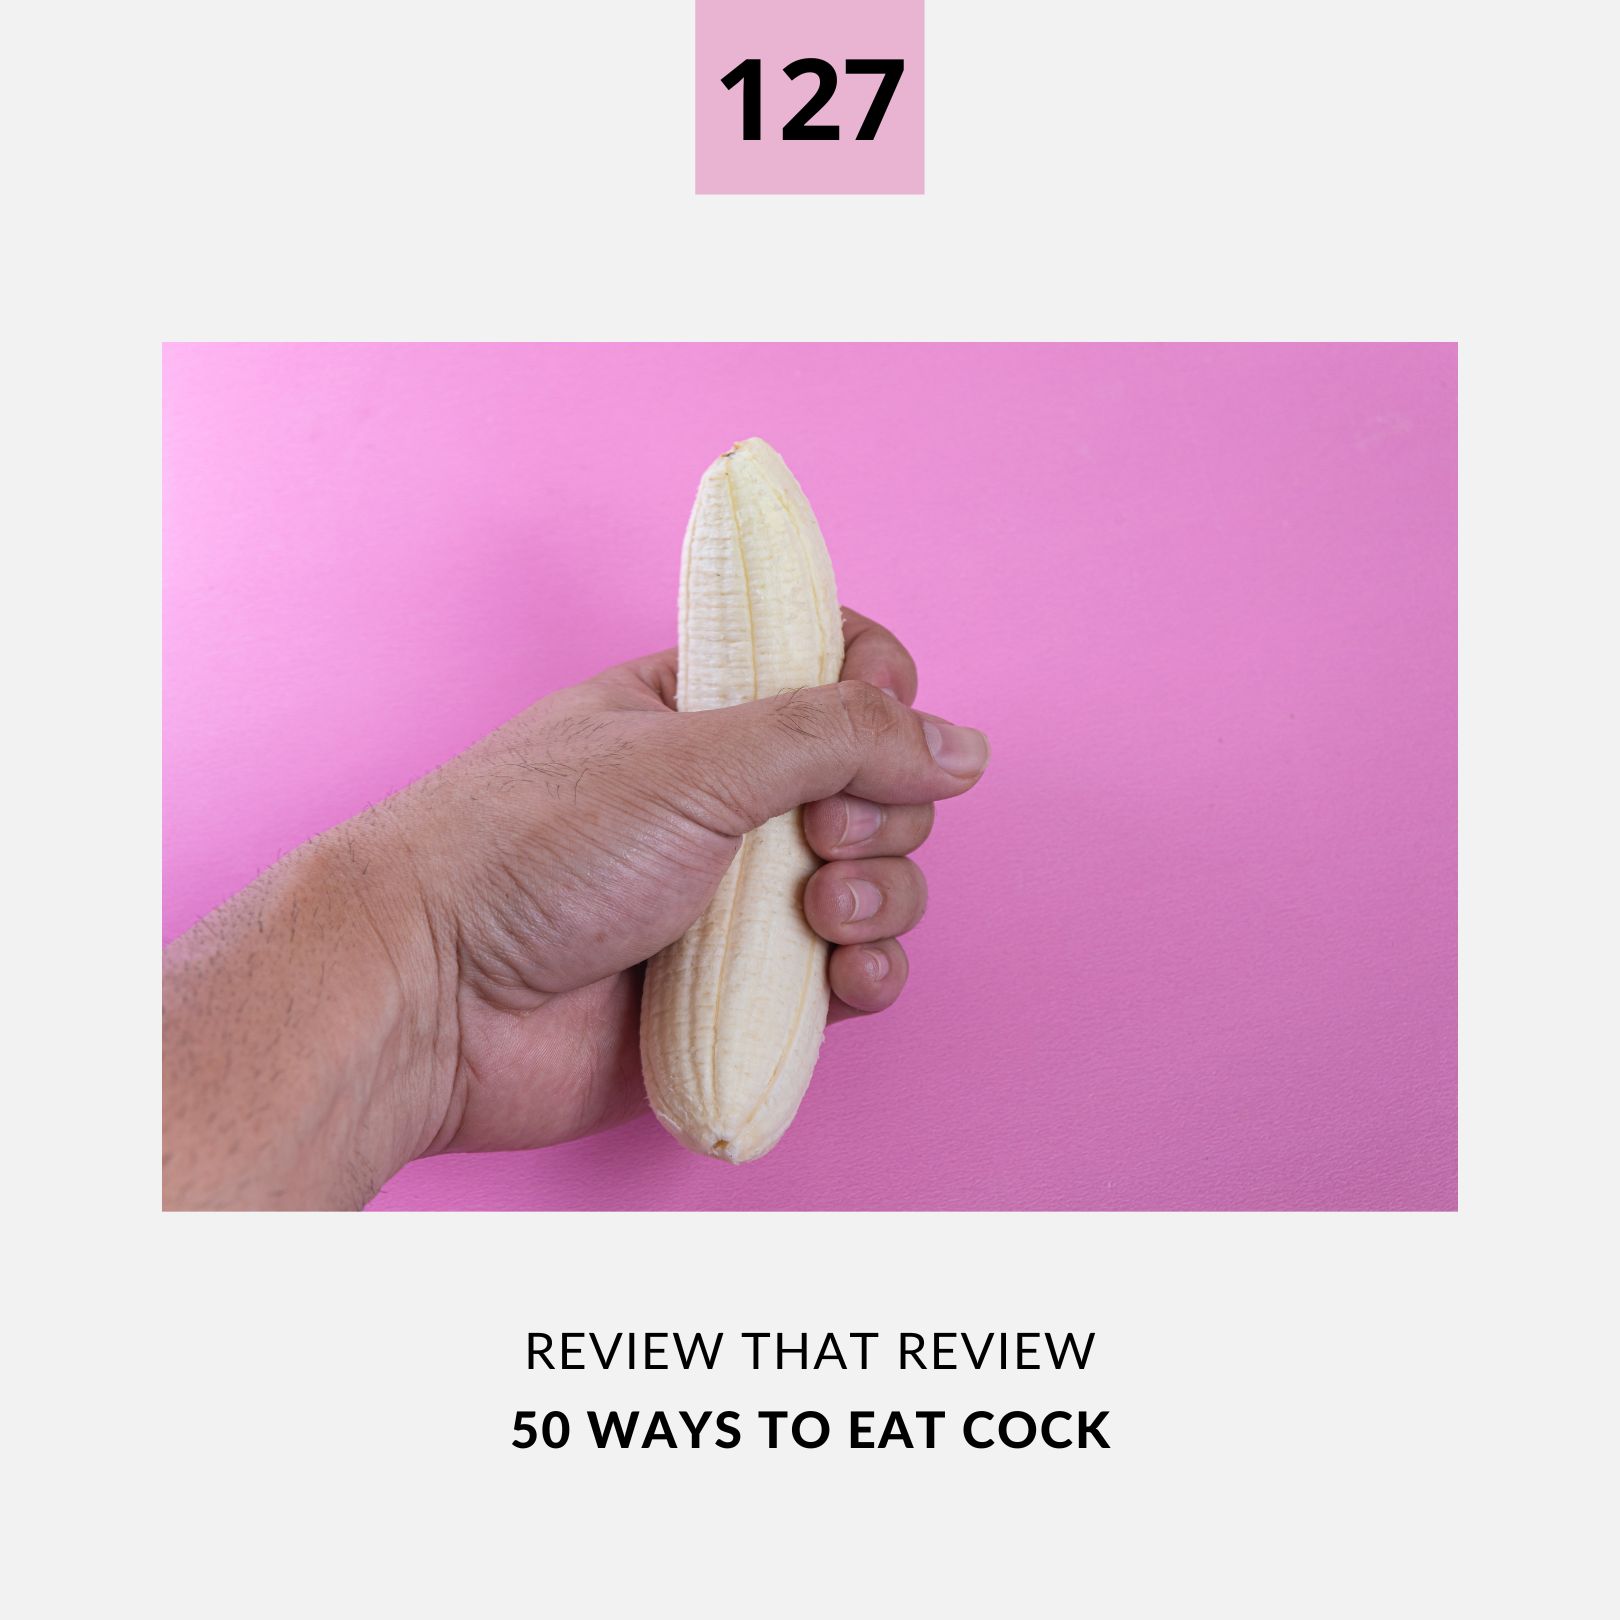 127: 50 Ways to Eat Cock - 5 Star Review